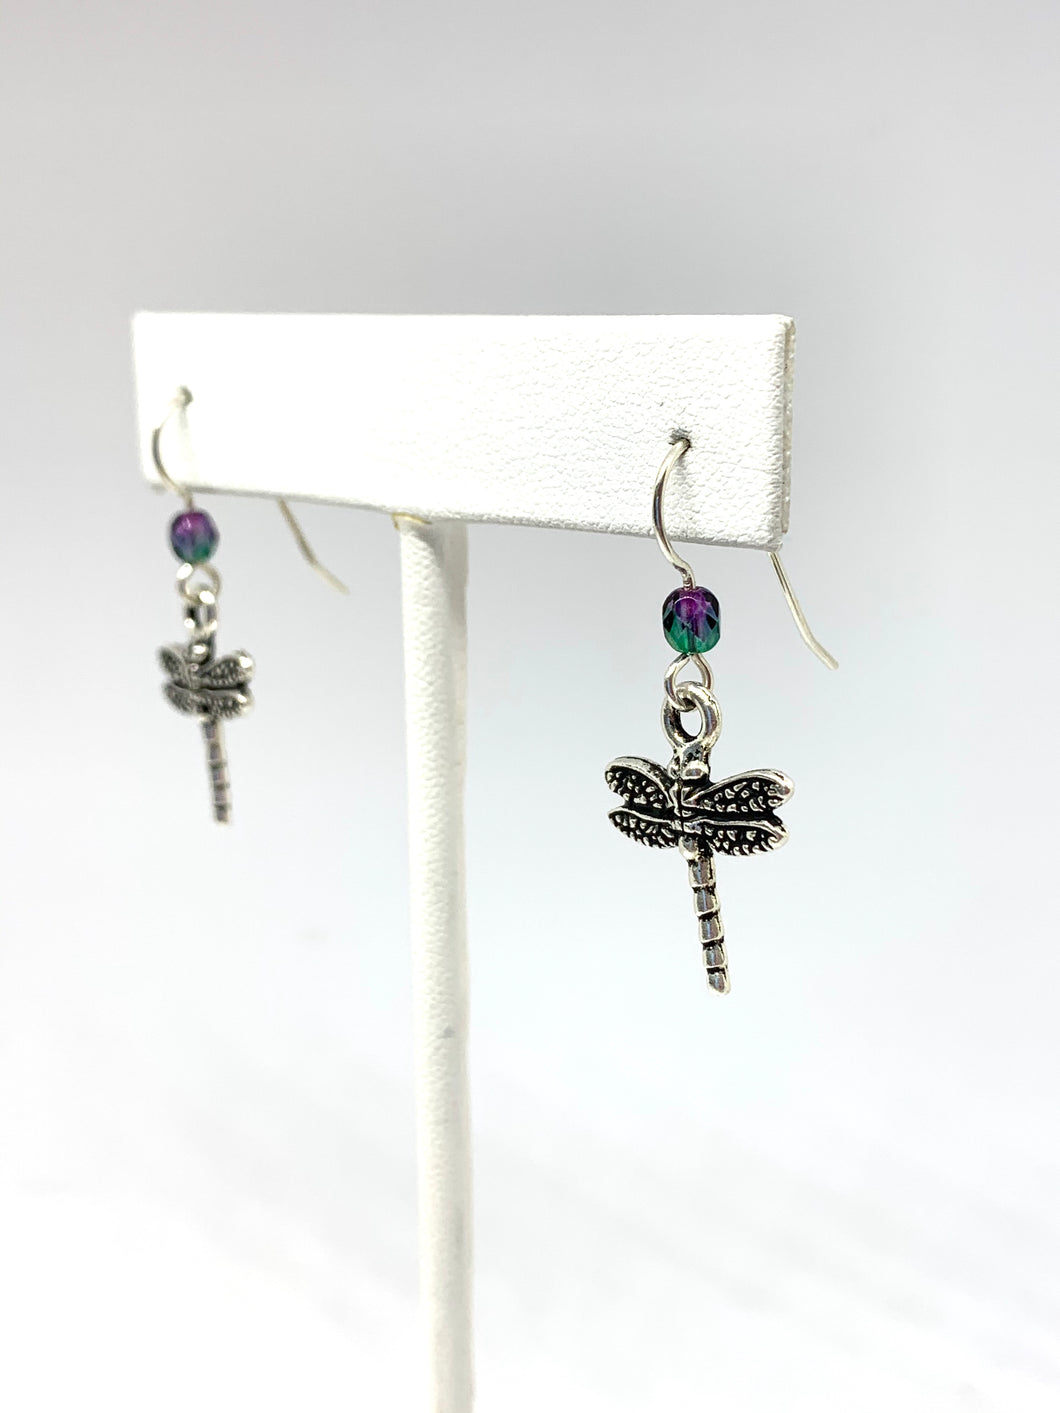 Dragonfly Earrings - Lively Accents